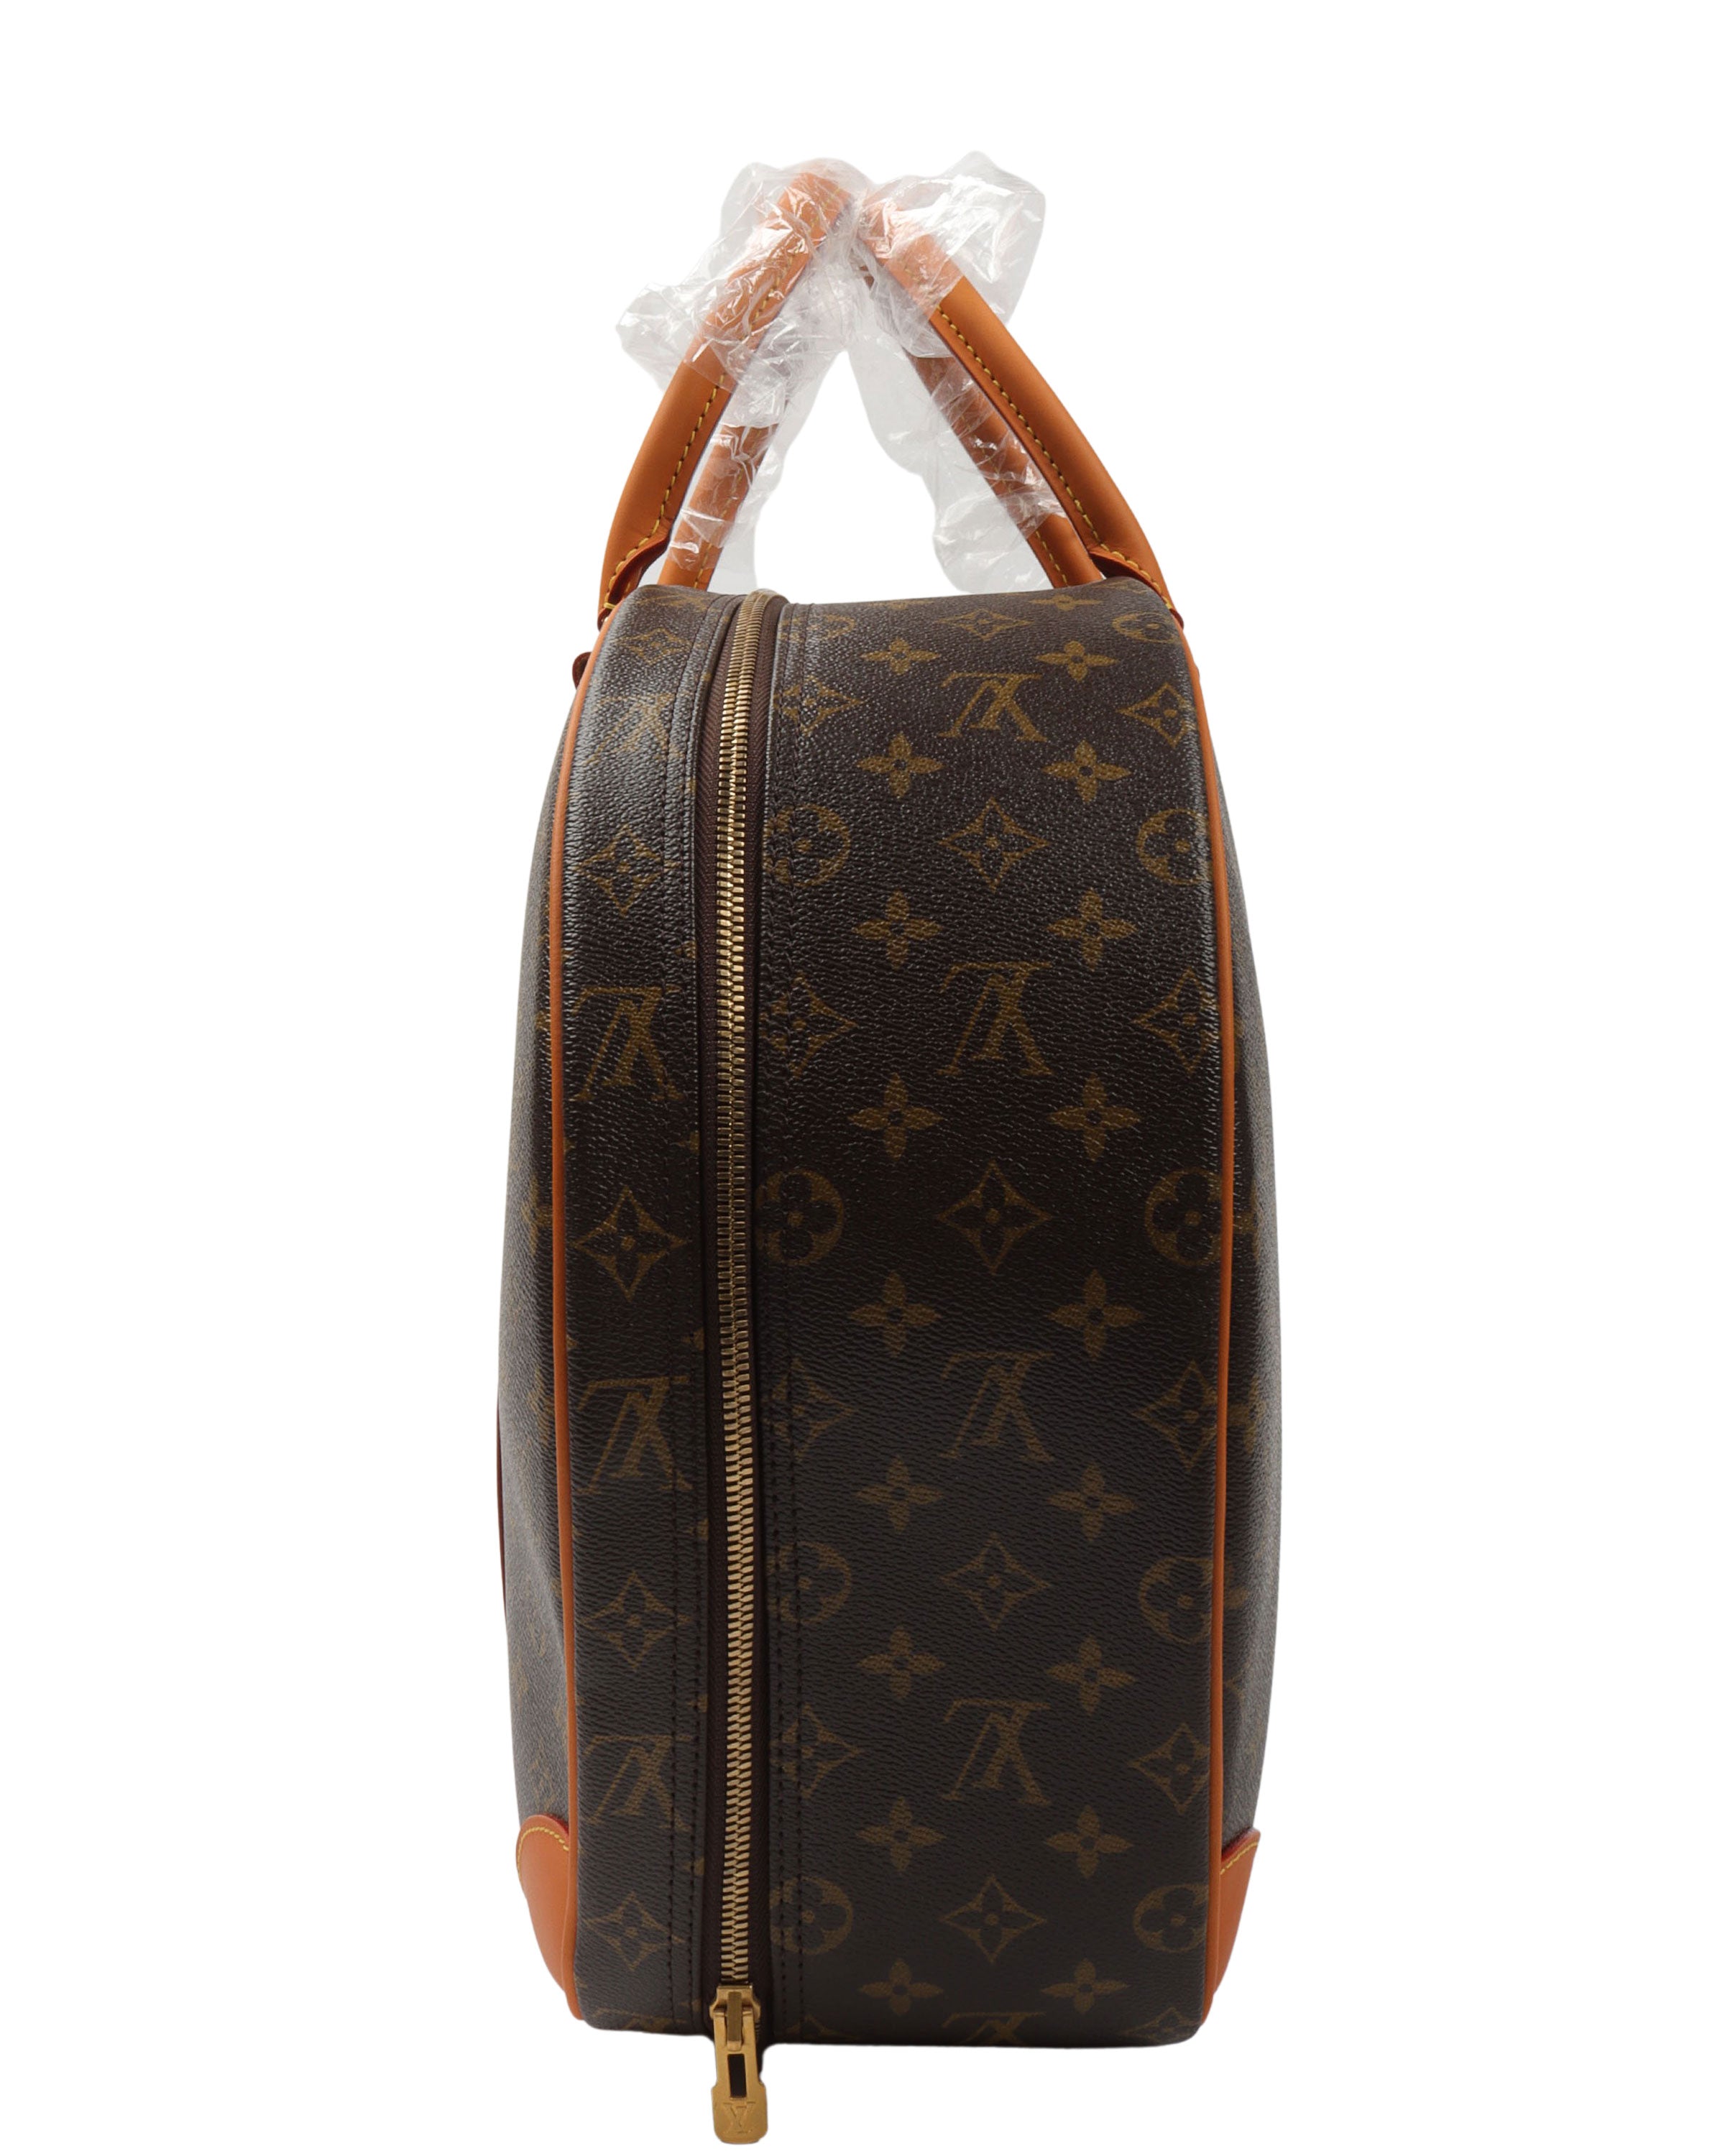 Louis Vuitton 2014 Karl Lagerfield Boxing Gloves With Bag and Mat